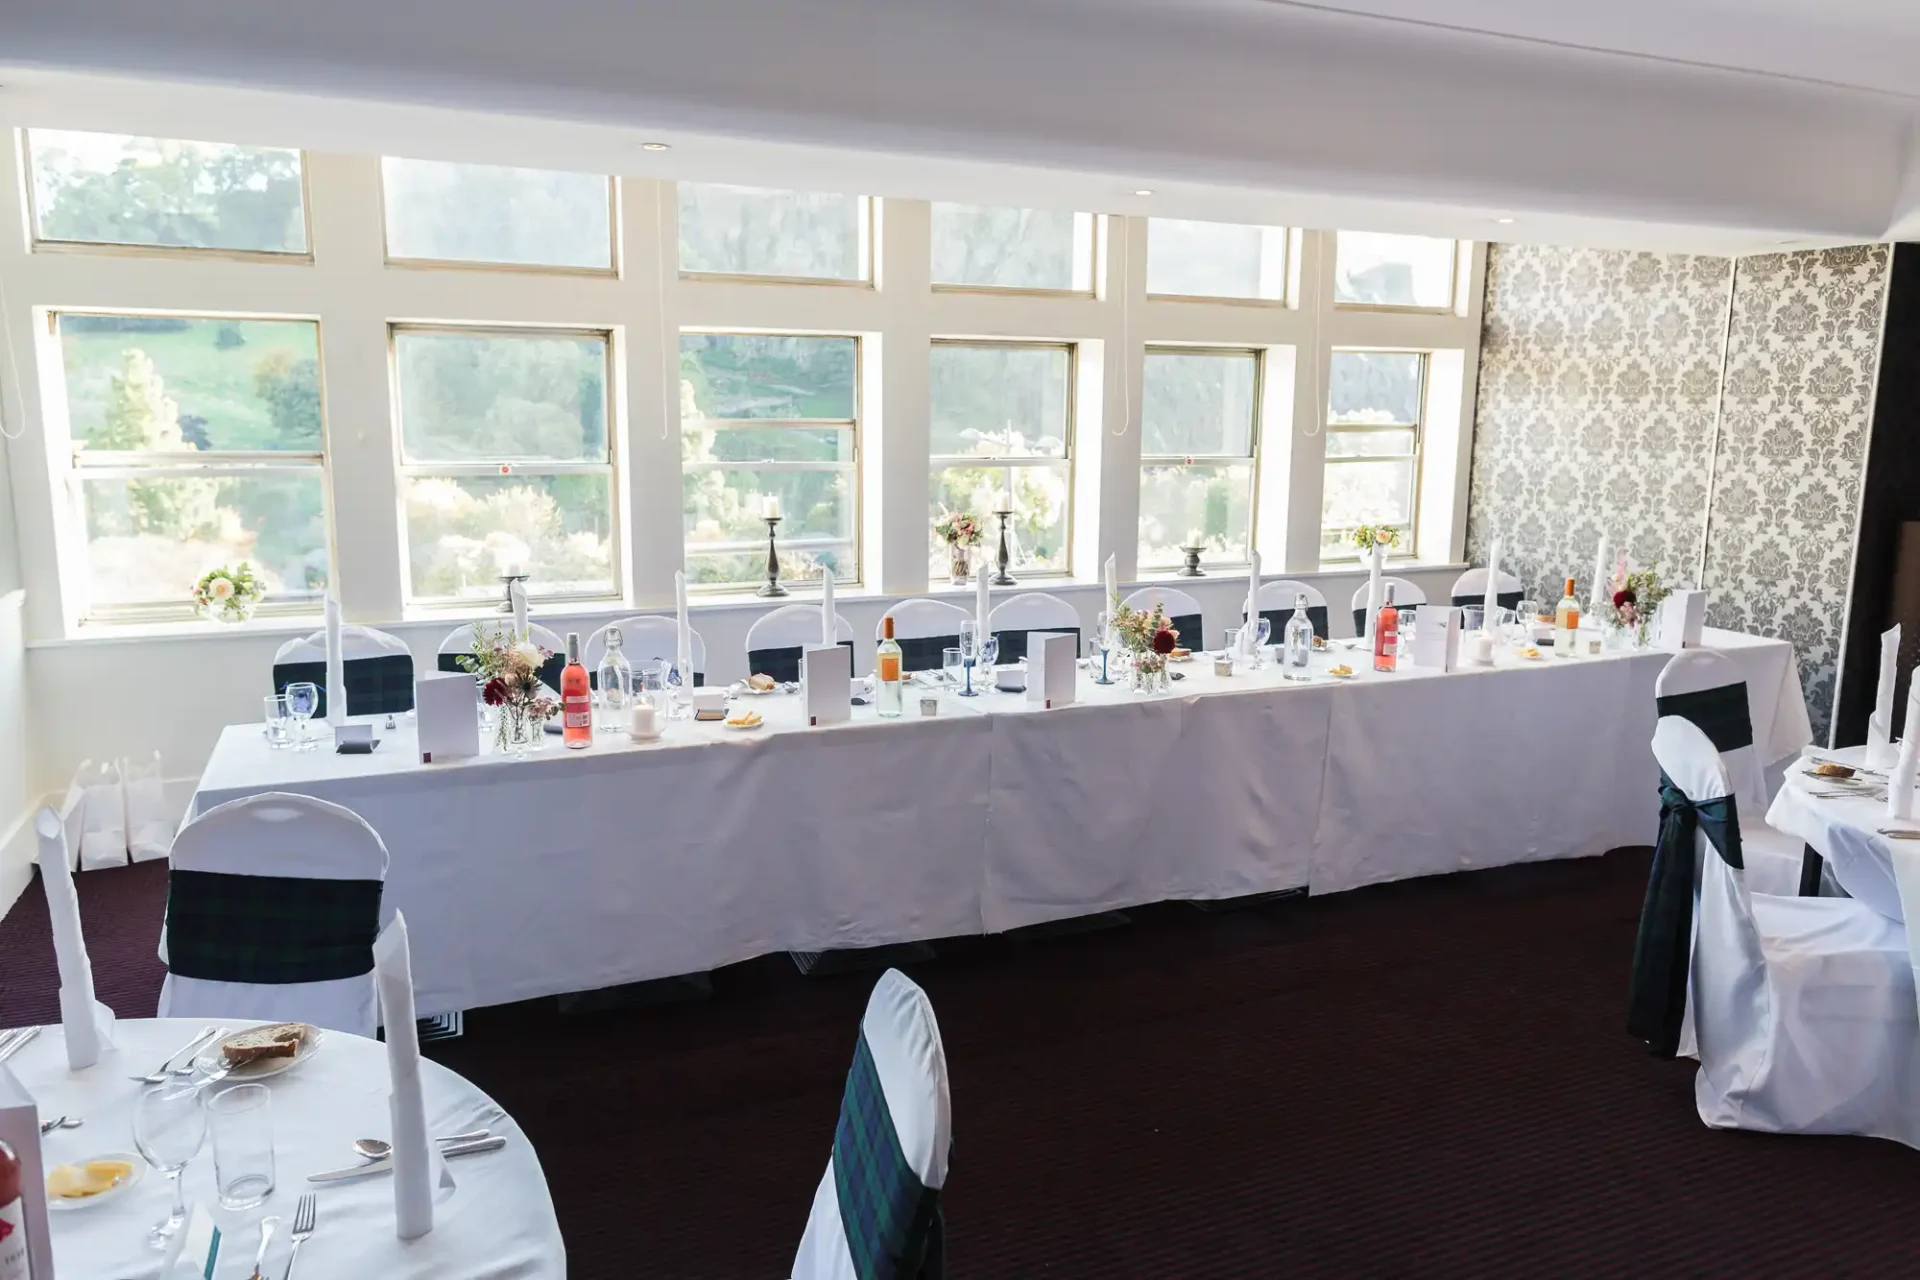 Elegant dining room setup for an event, with a long table covered in white linen, chairs in black covers, and various table settings under large windows with a scenic view.